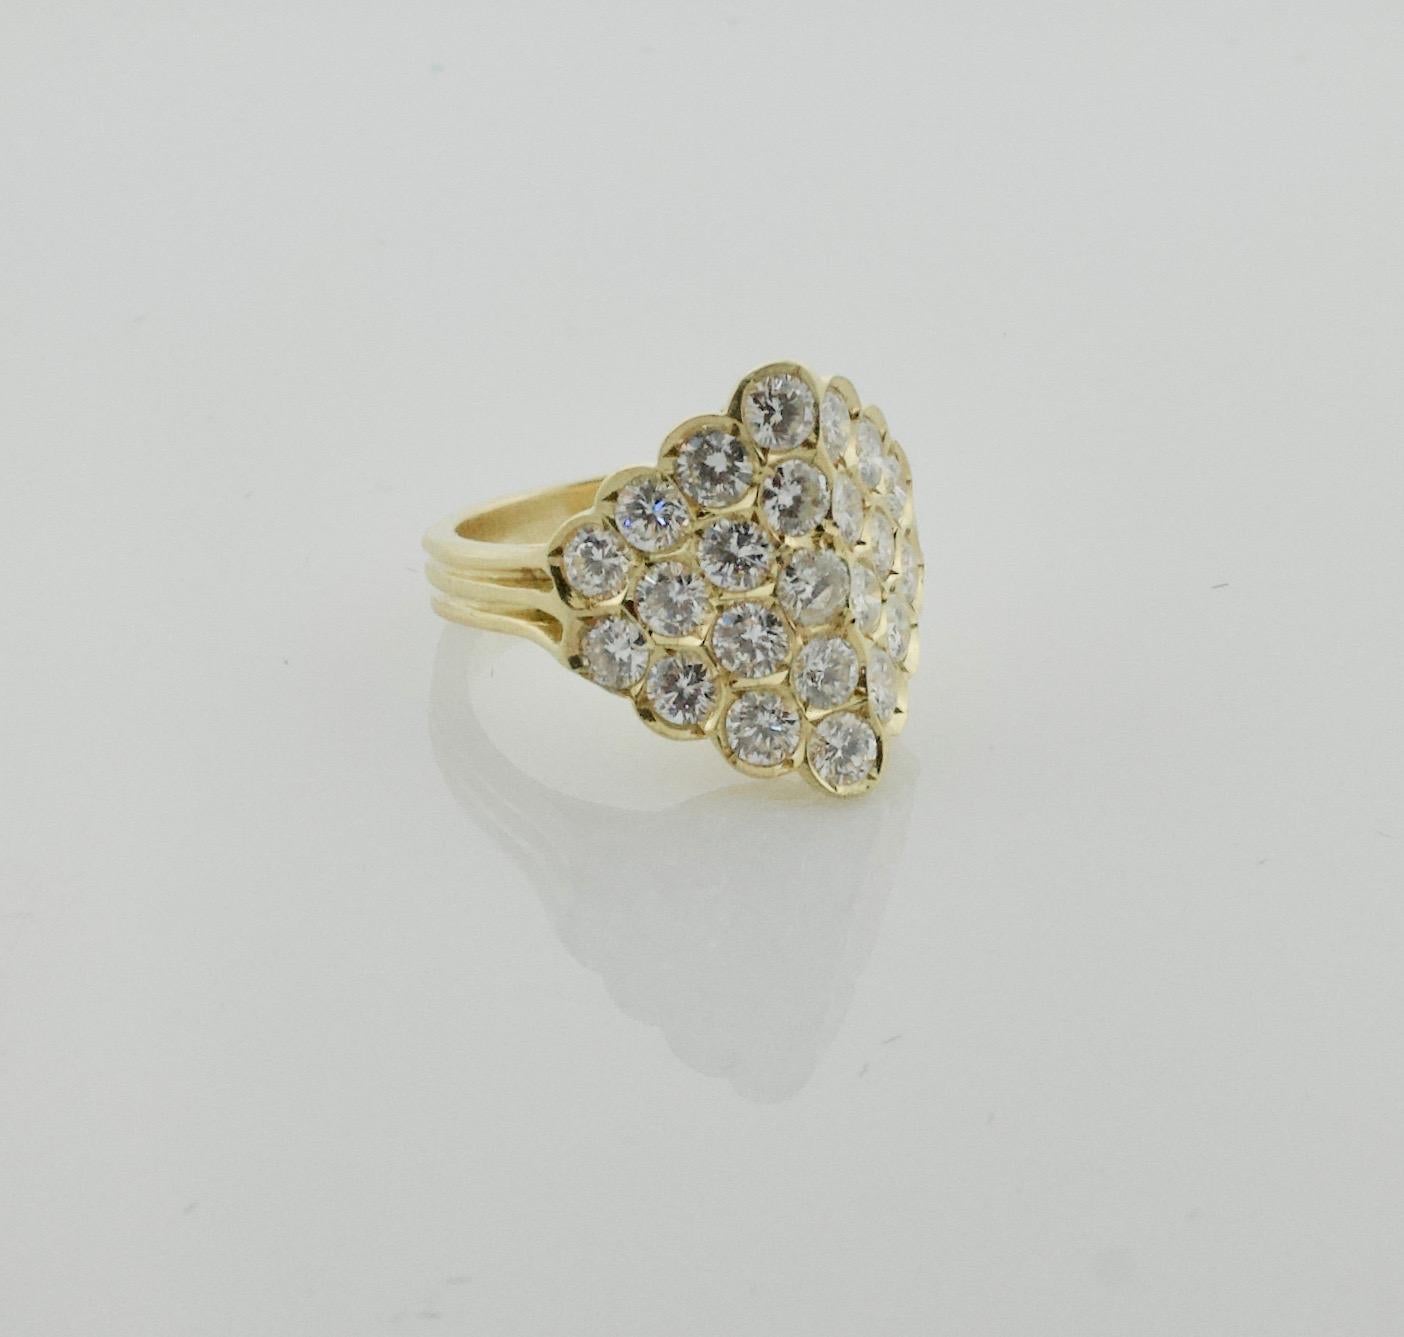 Delightful 18 Karat Diamond Ring in Yellow Gold In Excellent Condition For Sale In Wailea, HI